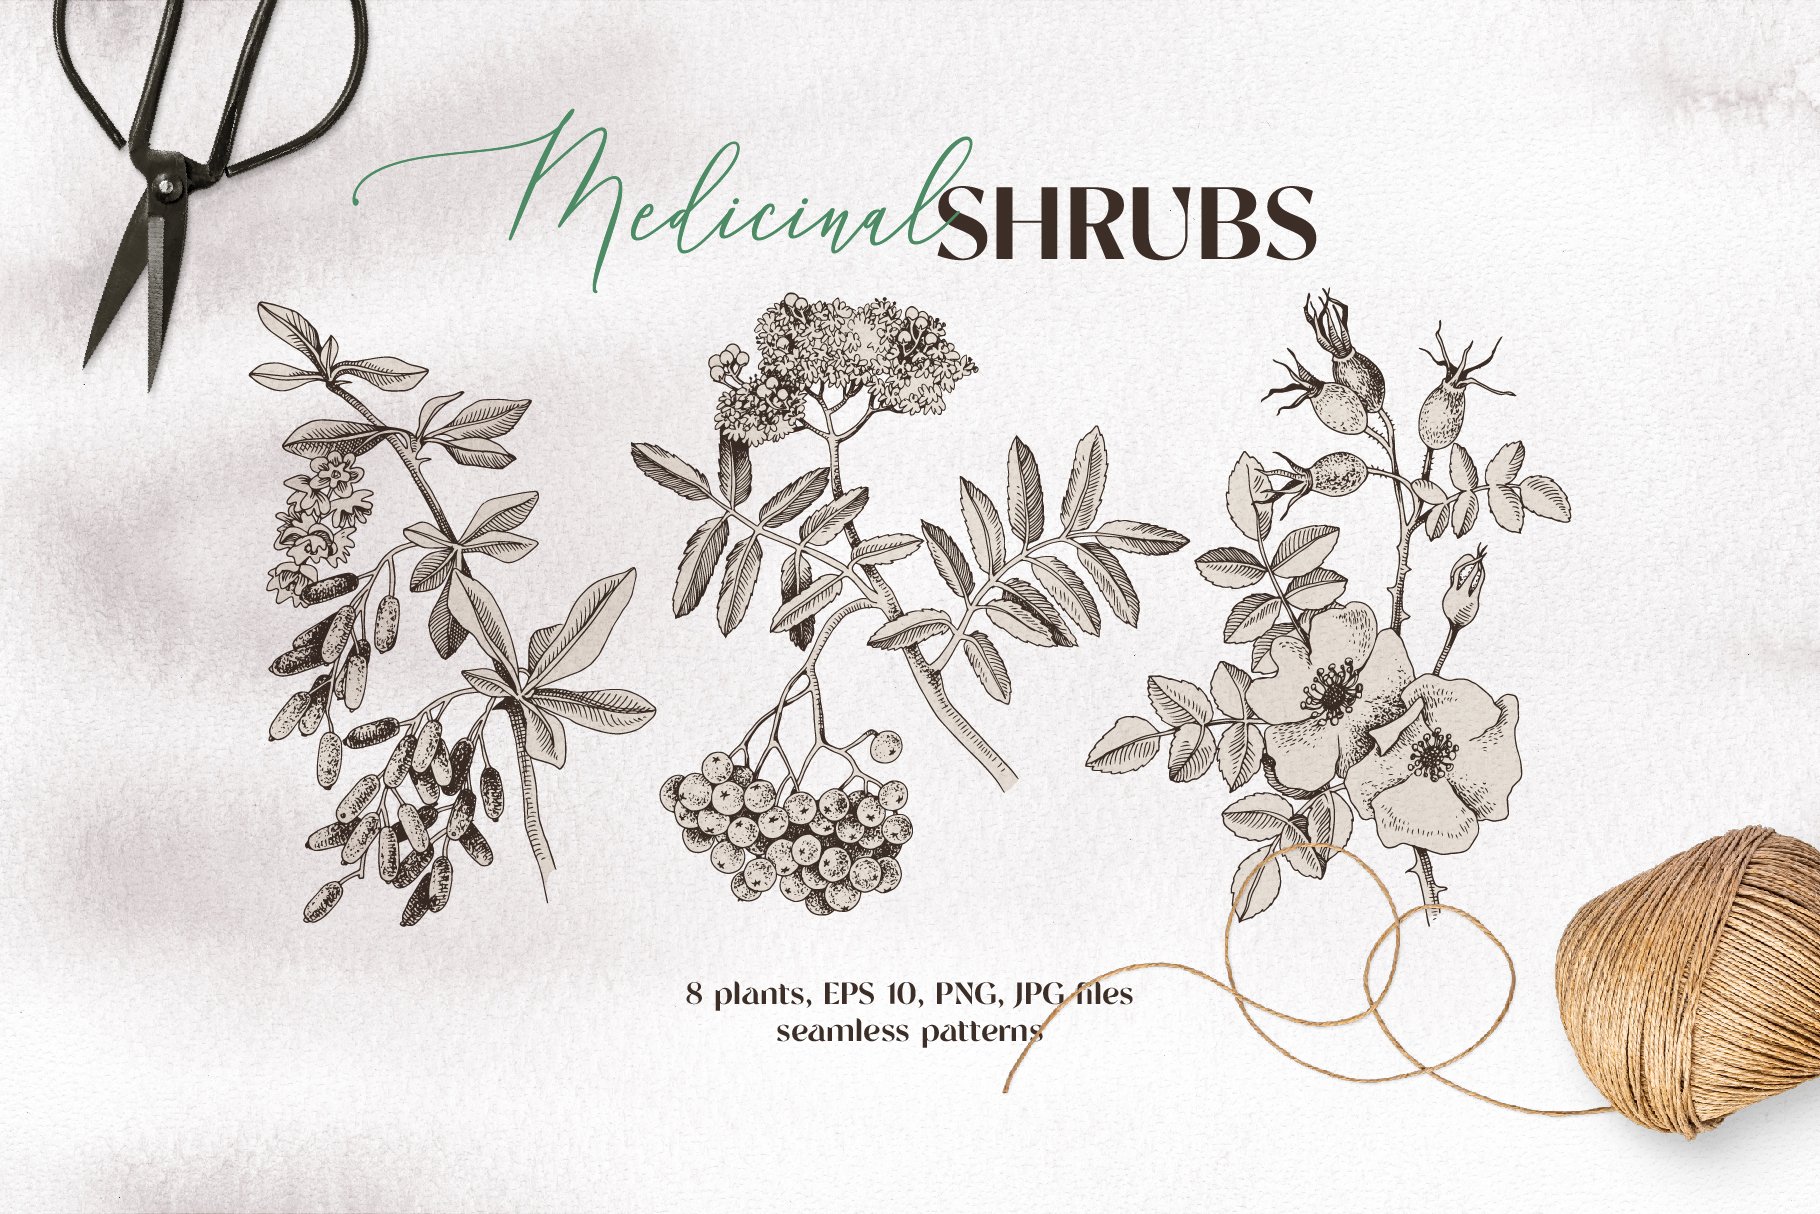 Drawings Medicinal Plants: Over 108,575 Royalty-Free Licensable Stock  Illustrations & Drawings | Shutterstock